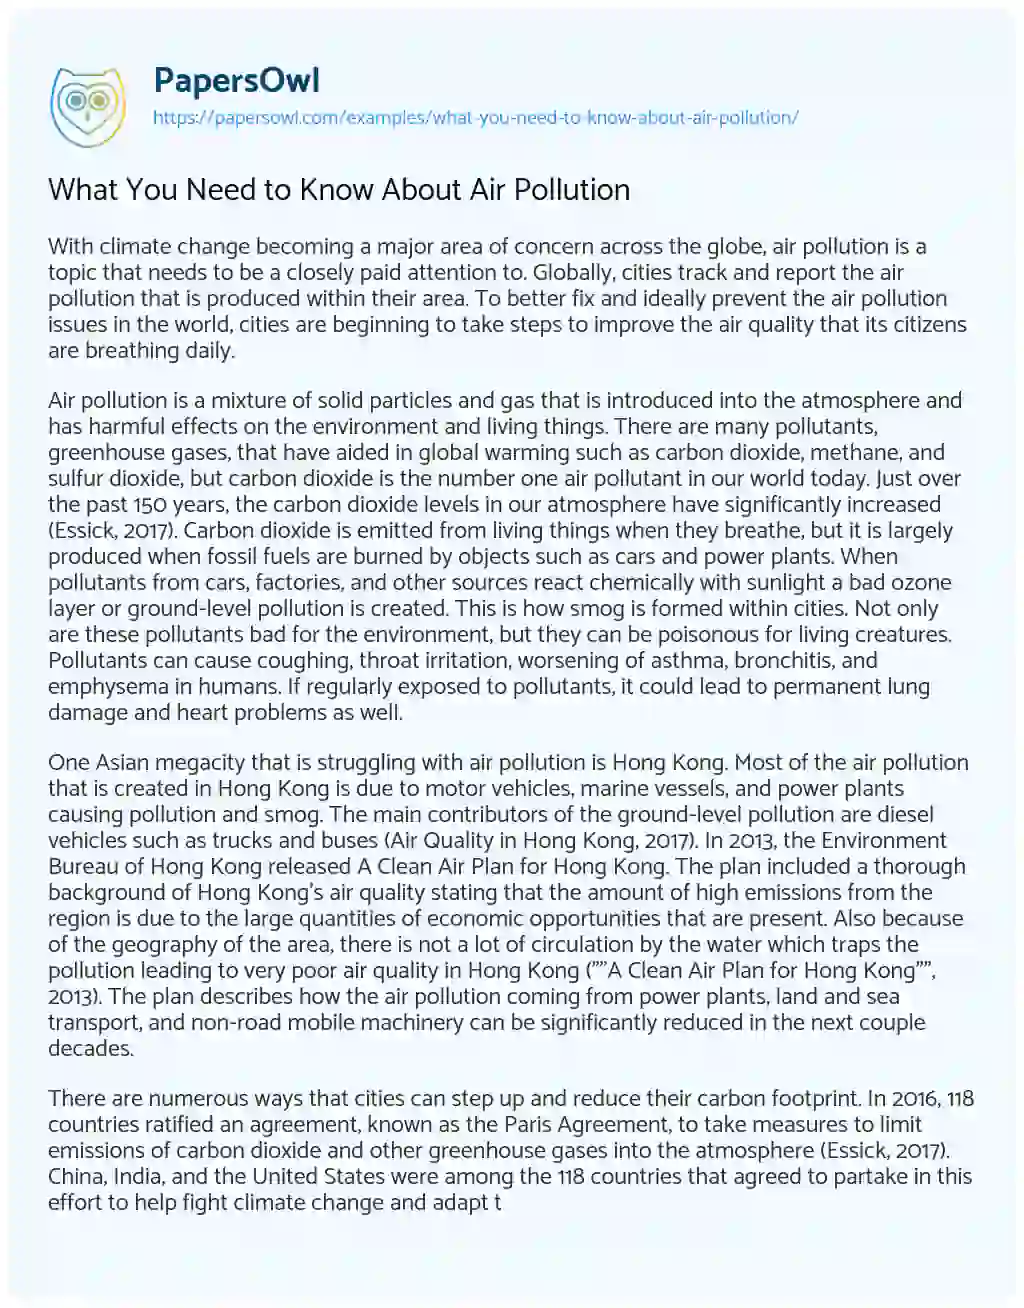 Essay on What you Need to Know about Air Pollution